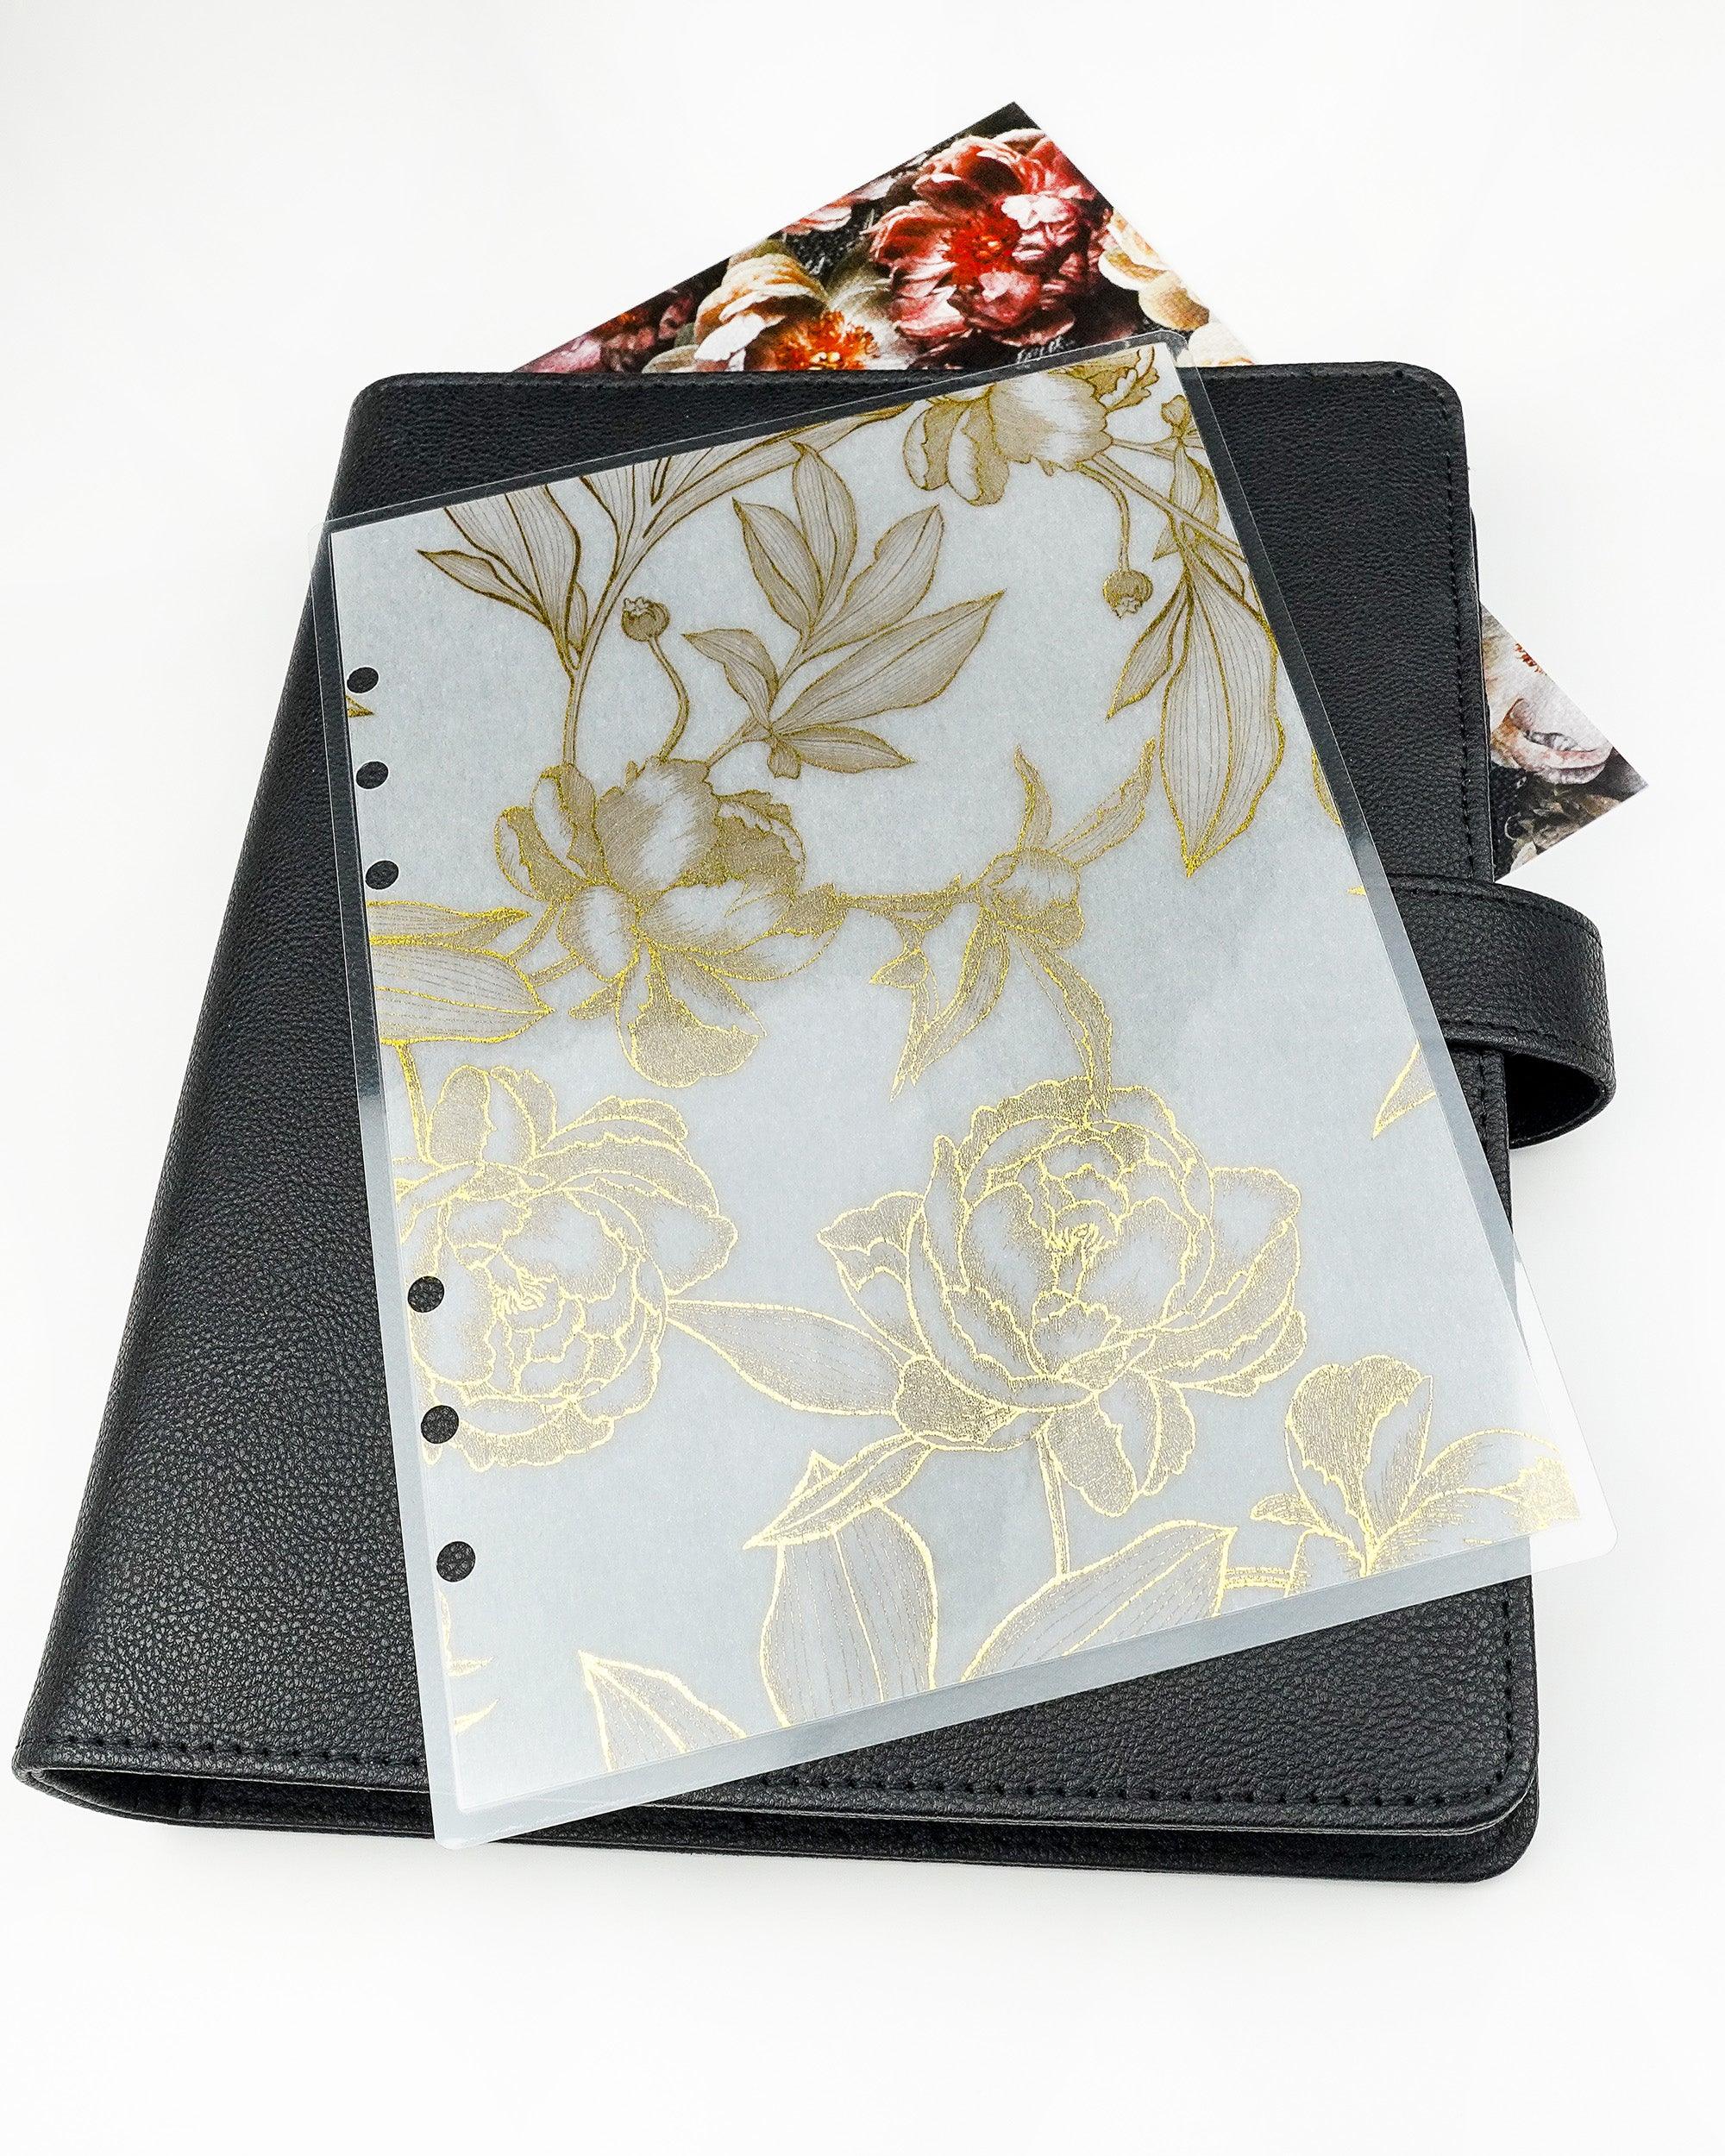 Gold foiled peonies planner dashboard for discbound and six ring planner systems or notebooks by Jane's Agenda.